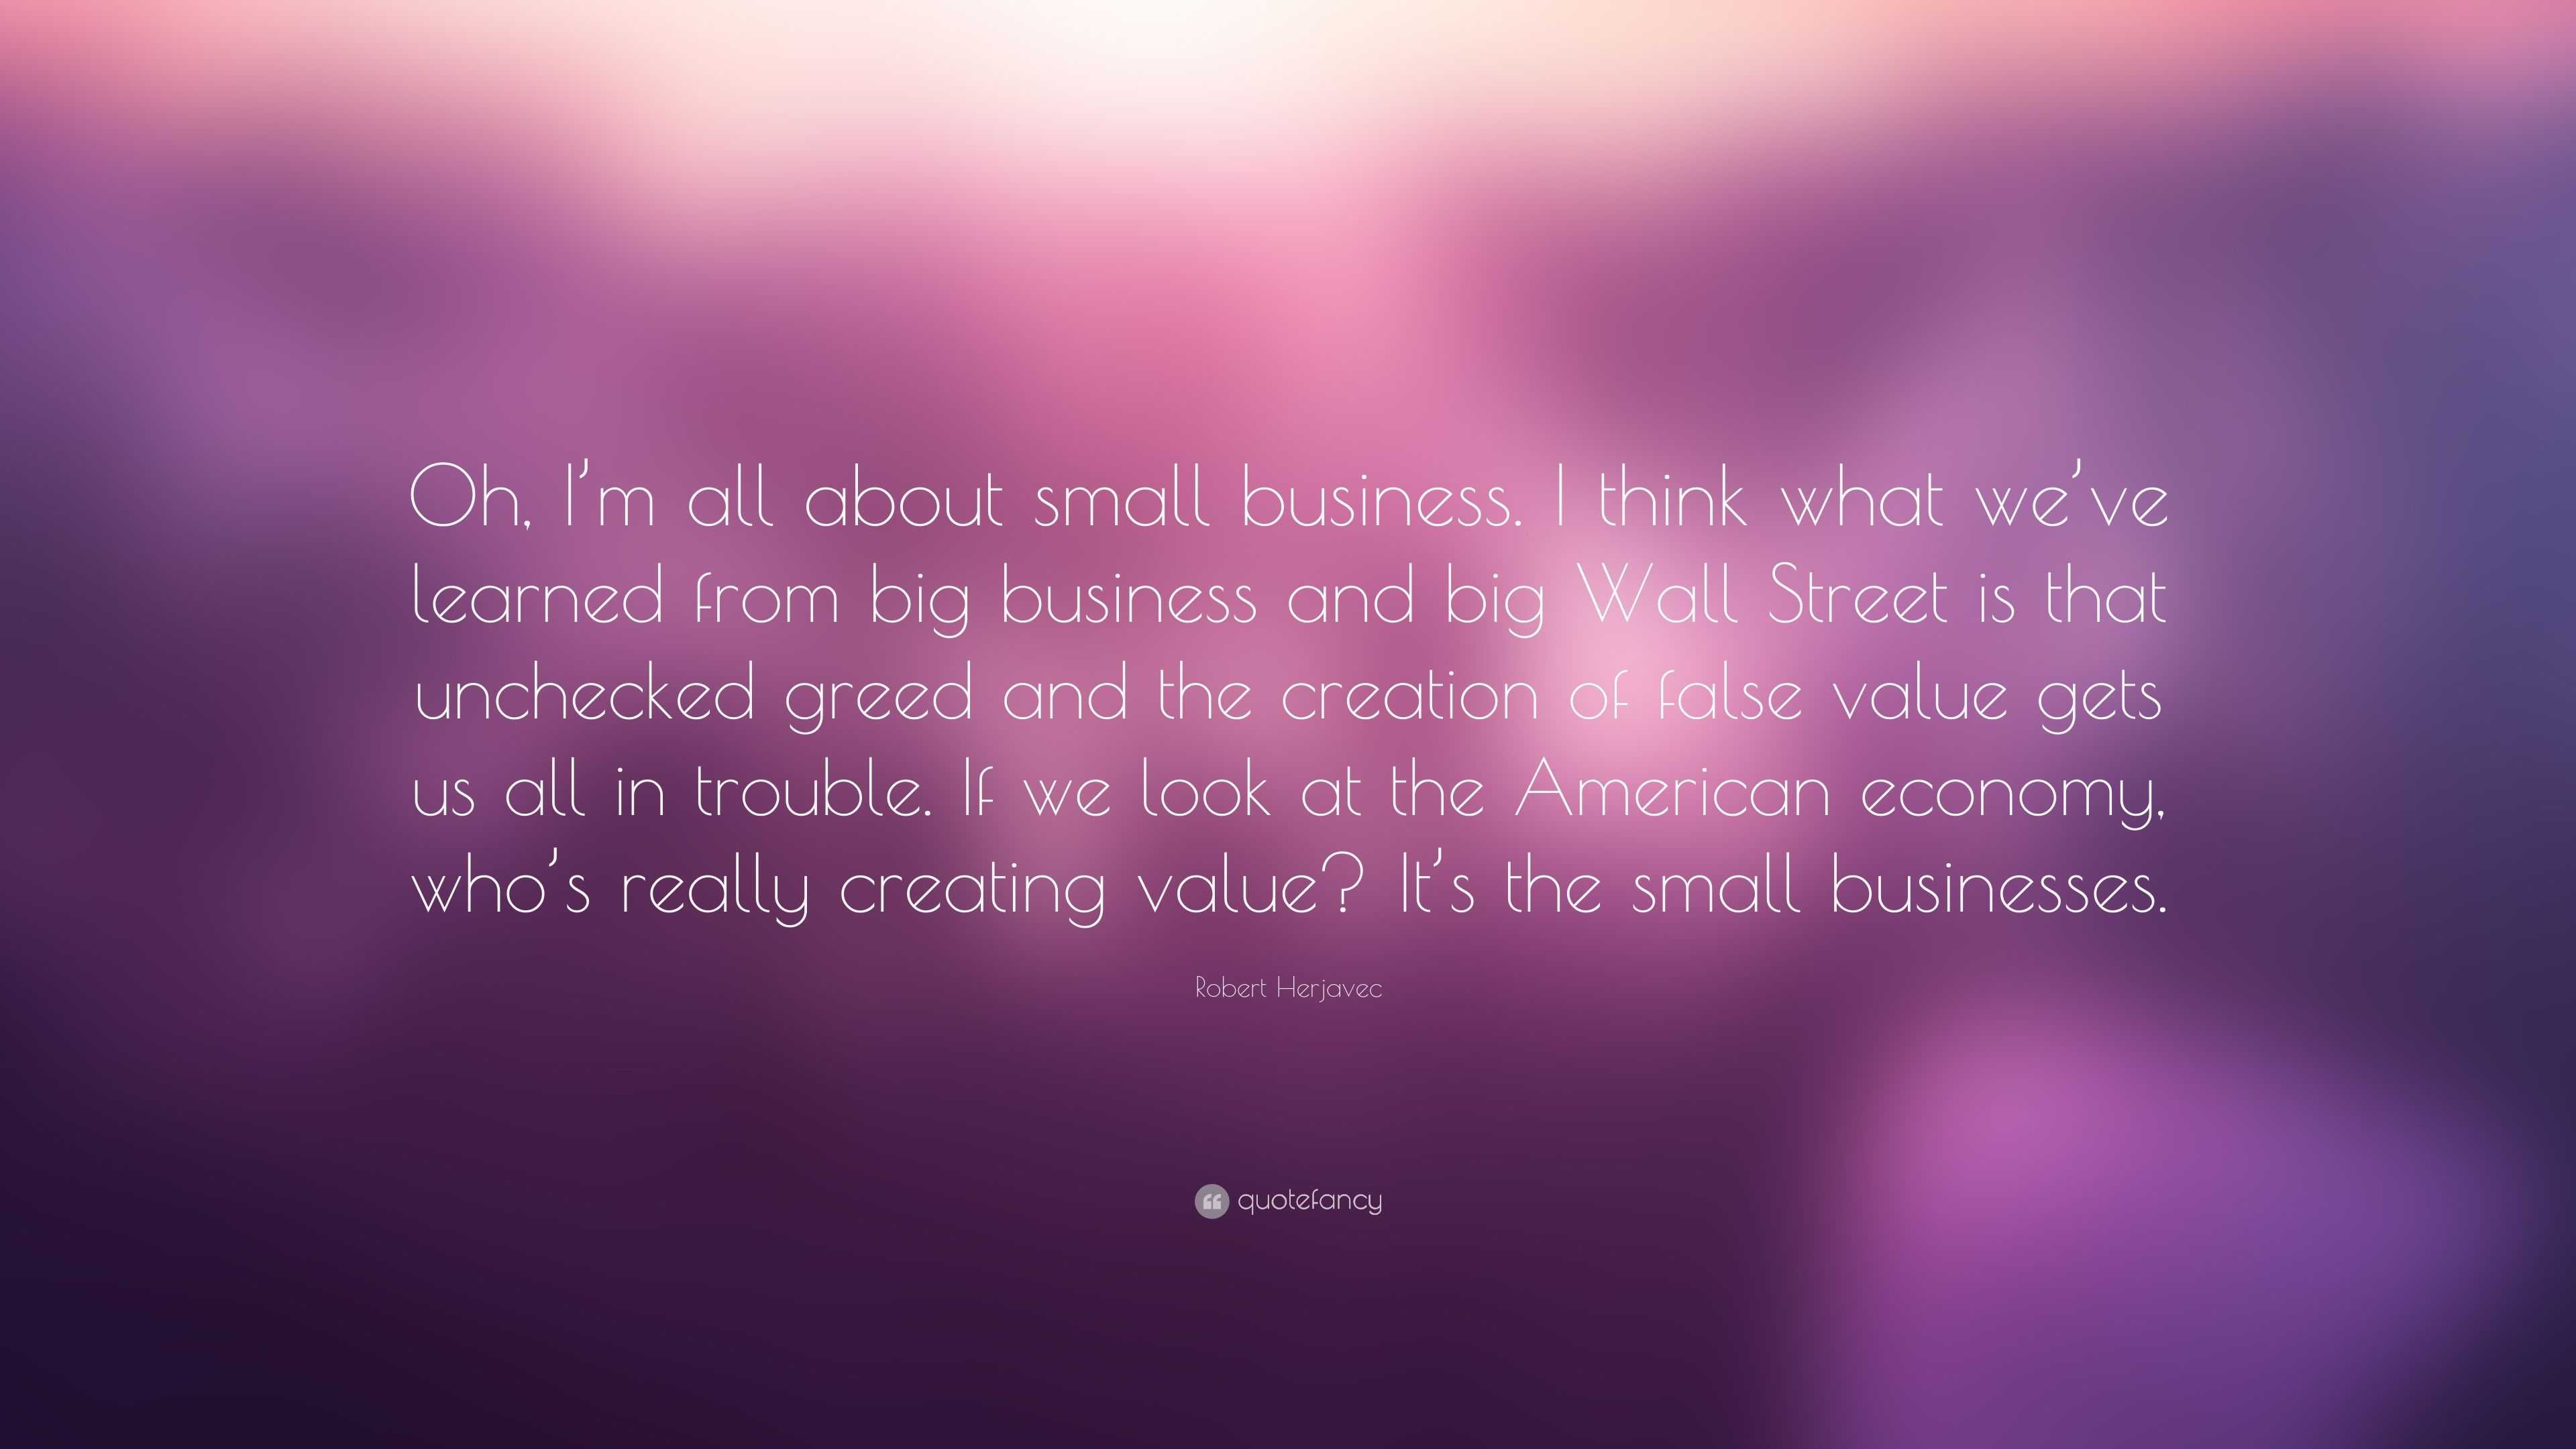 Robert Herjavec Quote: “Oh, I’m all about small business. I think what ...